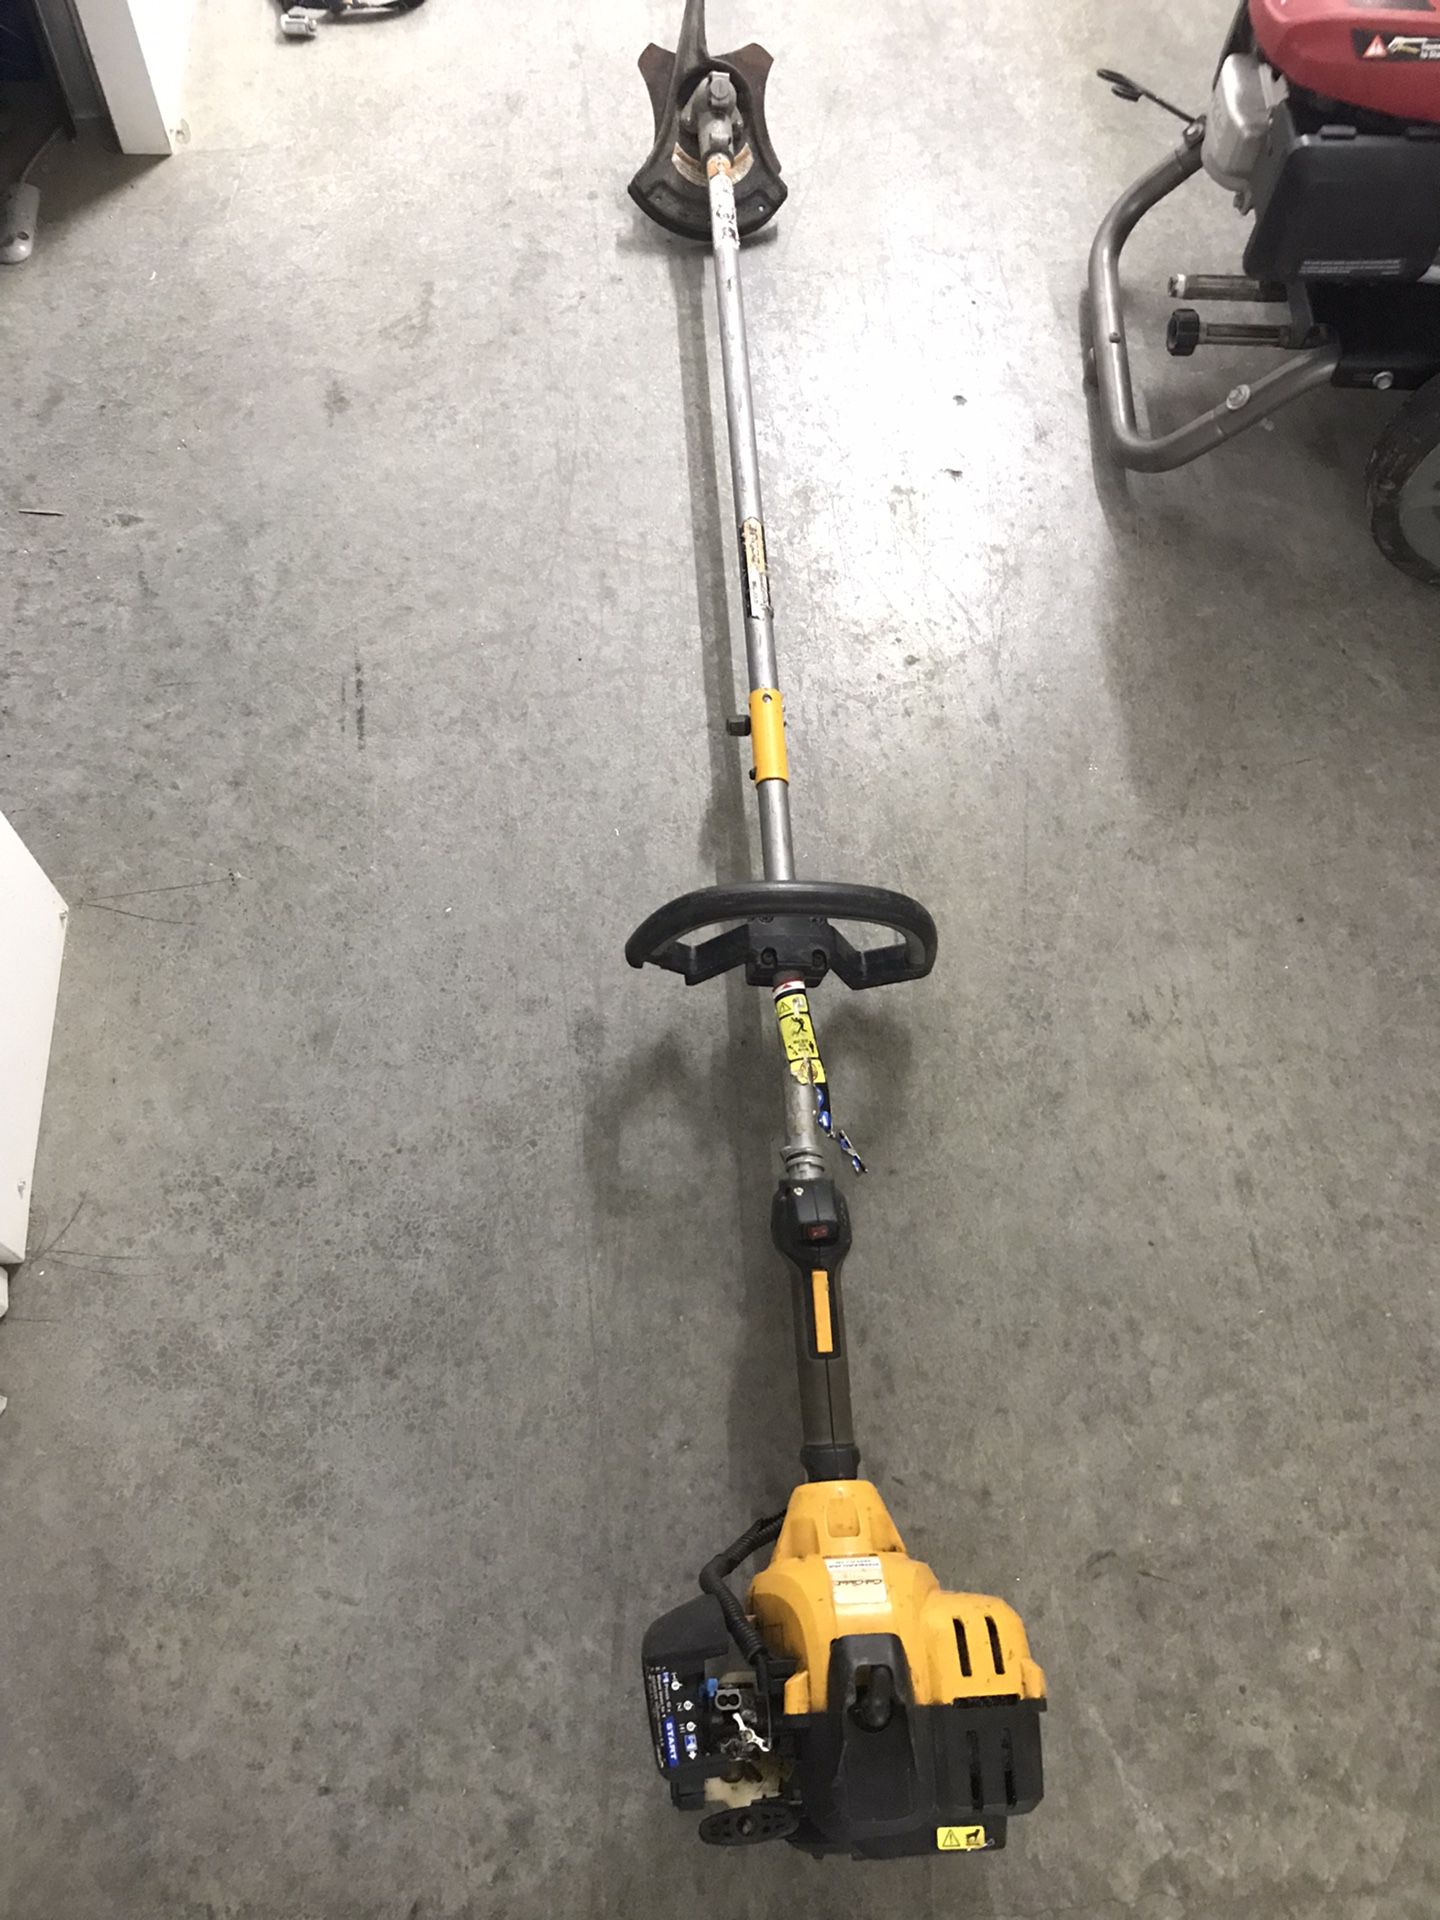 Cub Cadet Weed Eater